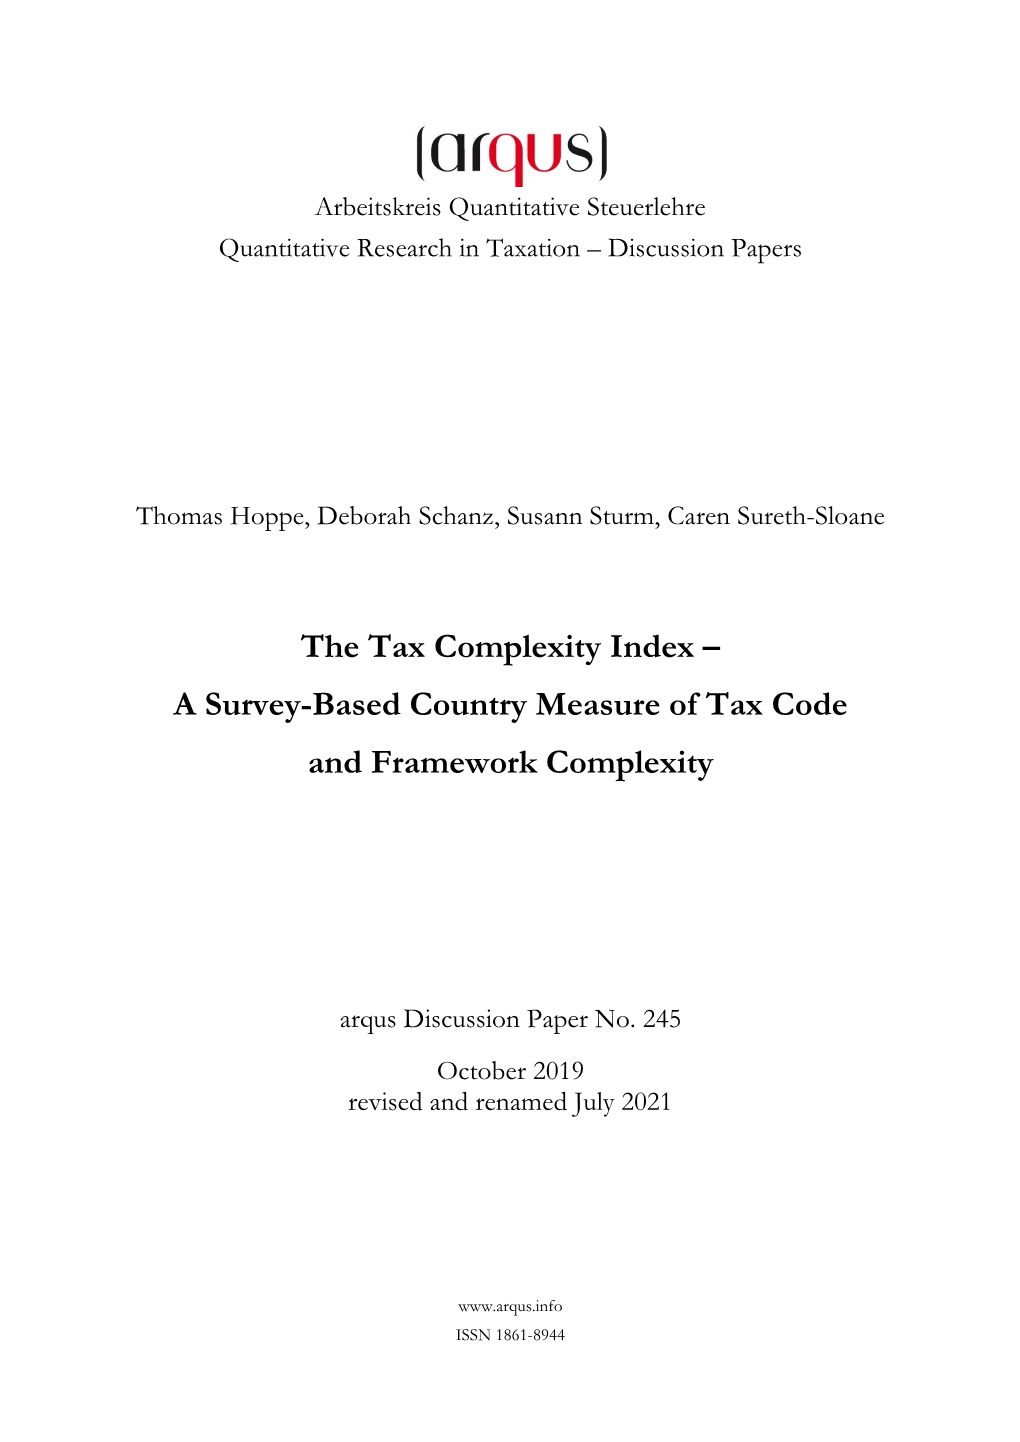 A Survey-Based Country Measure of Tax Code and Framework Complexity